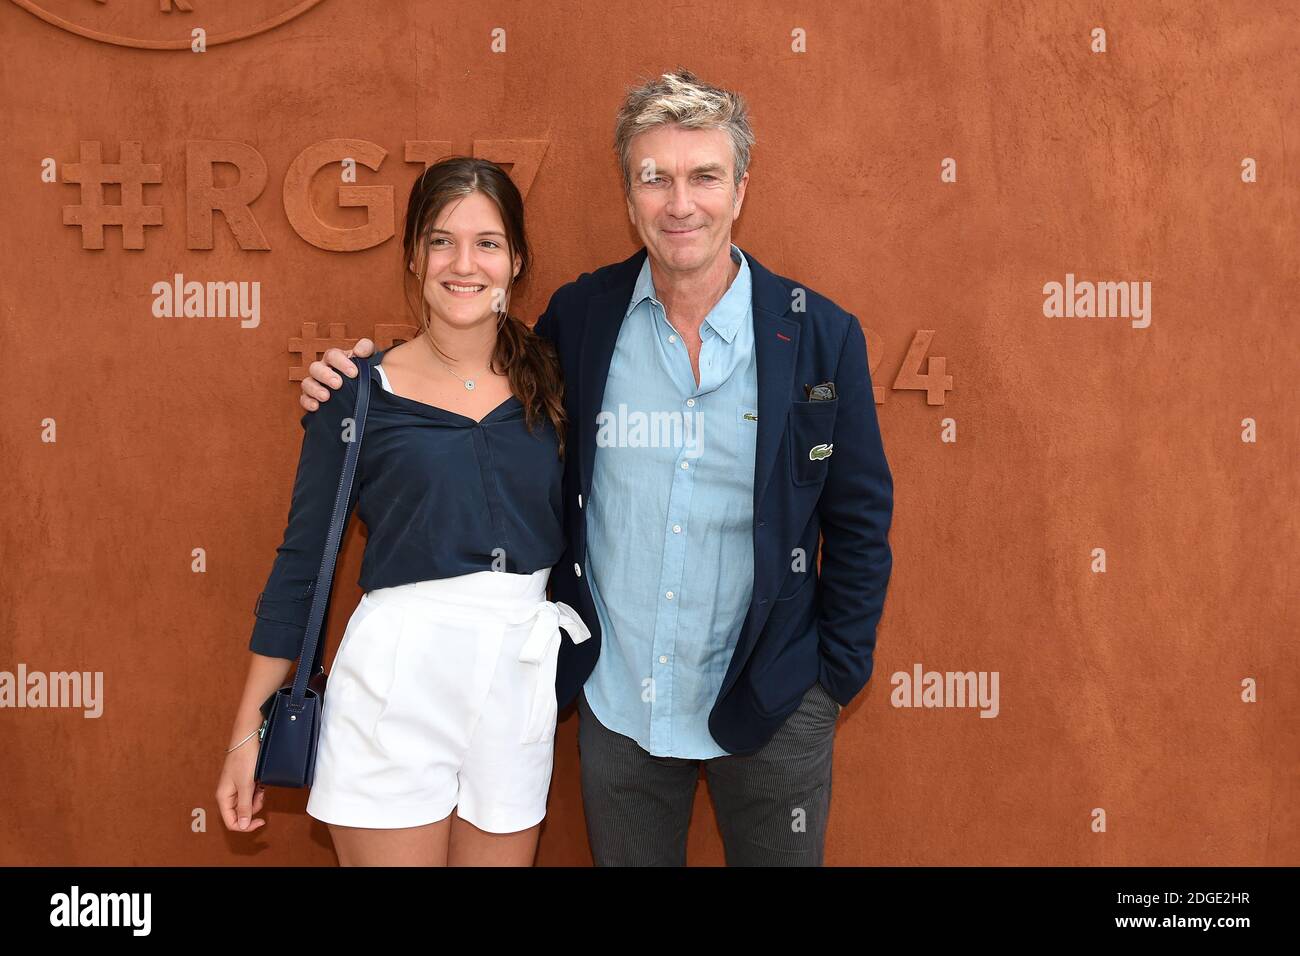 Philippe Caroit and his daughter Blanche posing at the Village during  French Tennis Open at Roland-Garros arena in Paris, France on May 30, 2017.  Photo by Laurent Zabulon/ABACAPRESS Stock Photo - Alamy